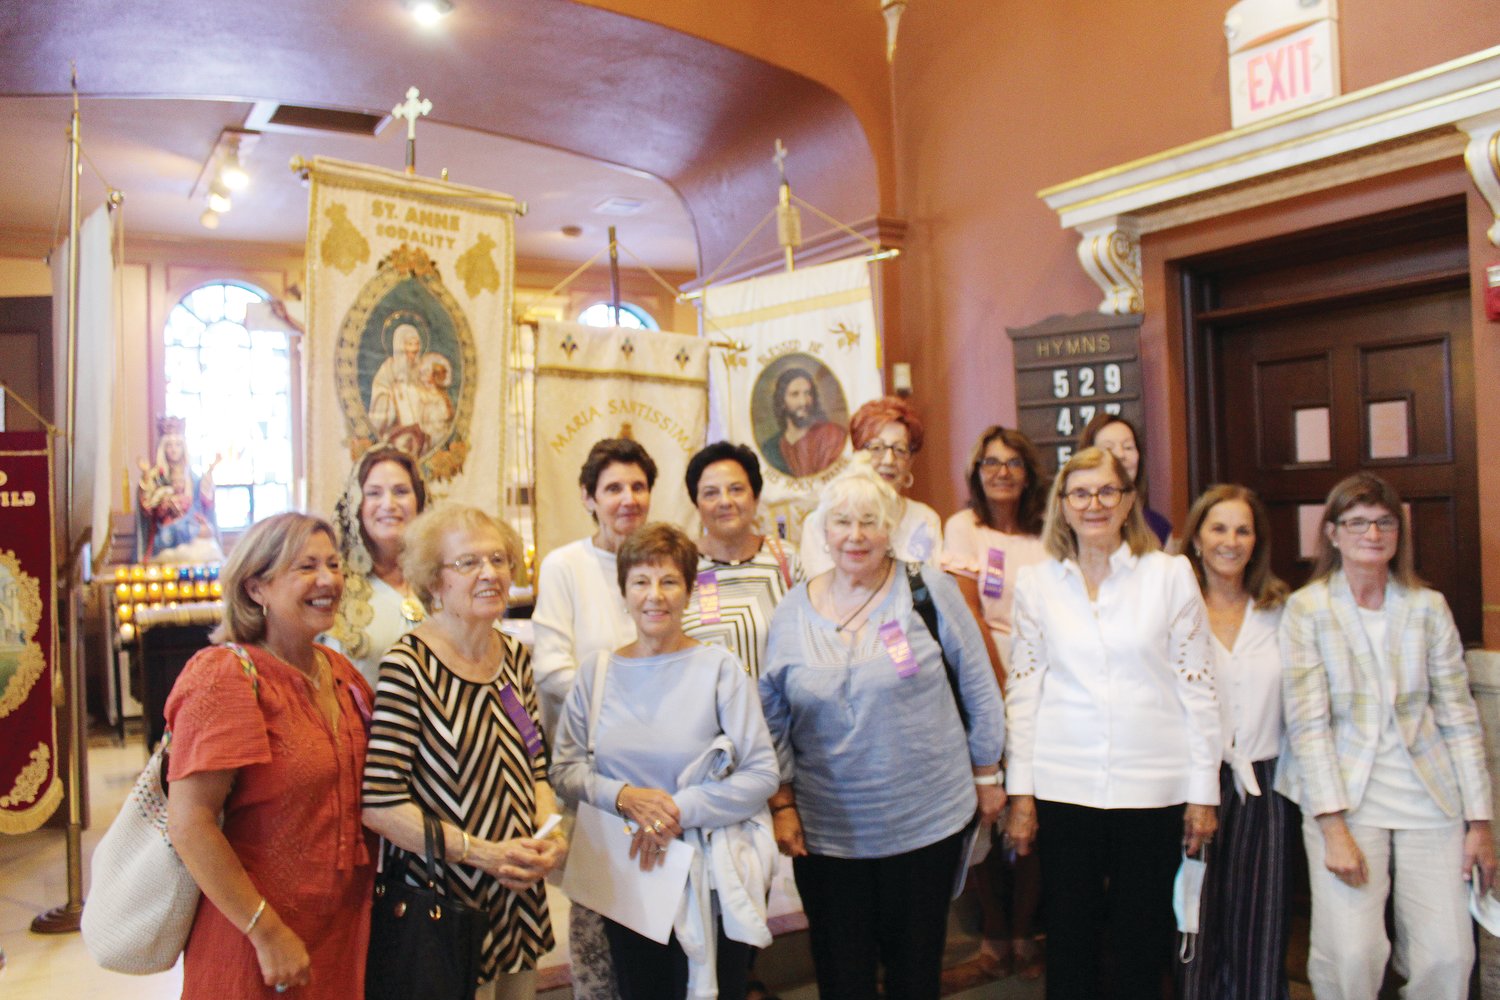 Members of the St. Anne Sodality at Our Lady of Grace Church, Johnston, gather at St. Mary Church in Cranston. Our Lady of Grace will host the next Mass for God the Father of All Mankind, observed each year on the Sunday closest to August 7.